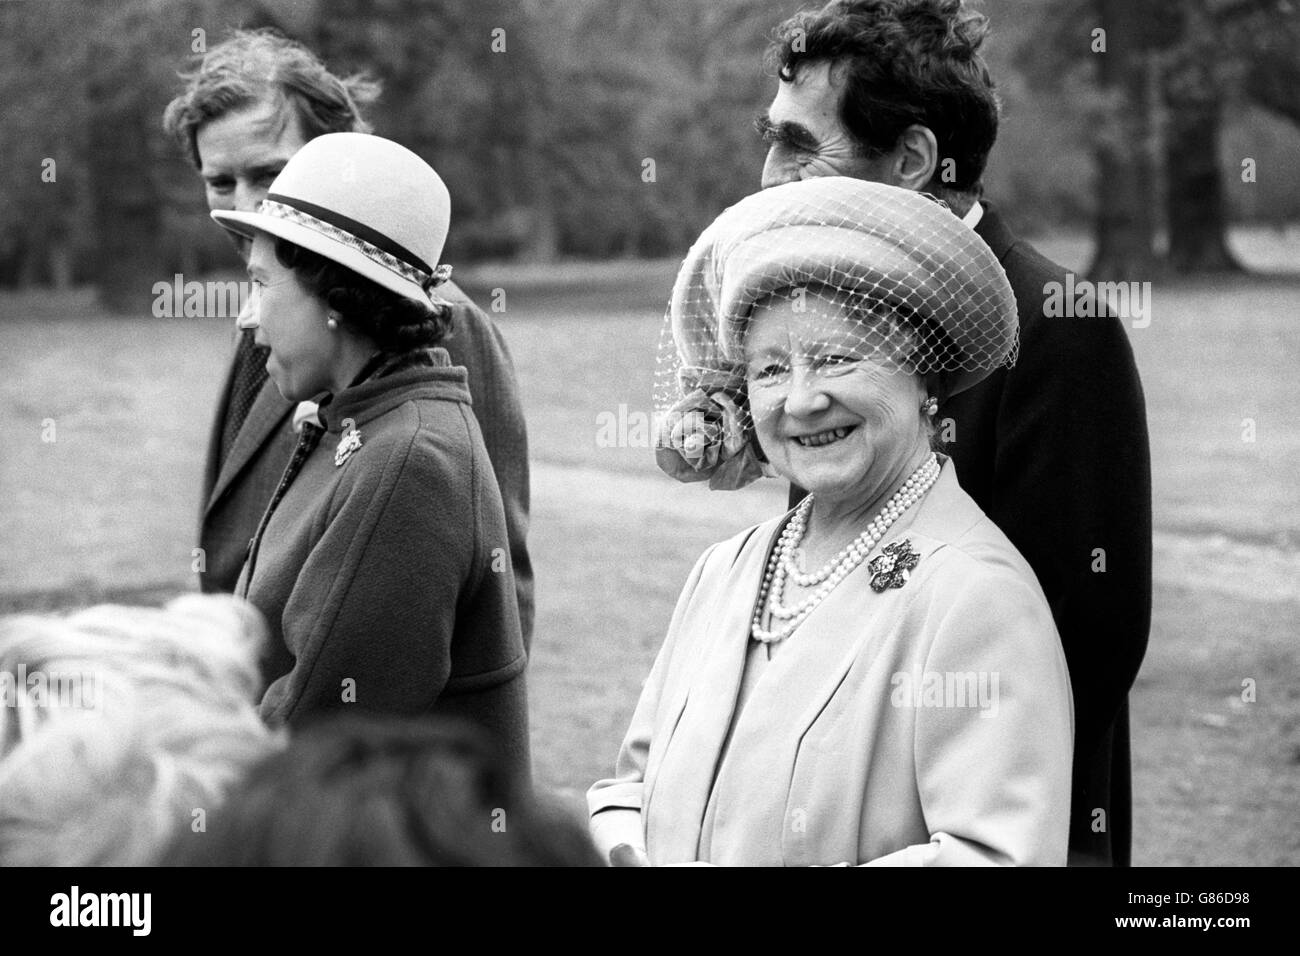 Queen Elizabeth The Queen Mother, with Queen Elizabeth II, in the Windsor Great Park for a tree-planting ceremony. The Queen Mother planted a Purple Dawyck Beech, marking National Tree Week, and Queen Elizabeth II planted an identical tree in honour of her Royal mother's 80th birthday. Stock Photo